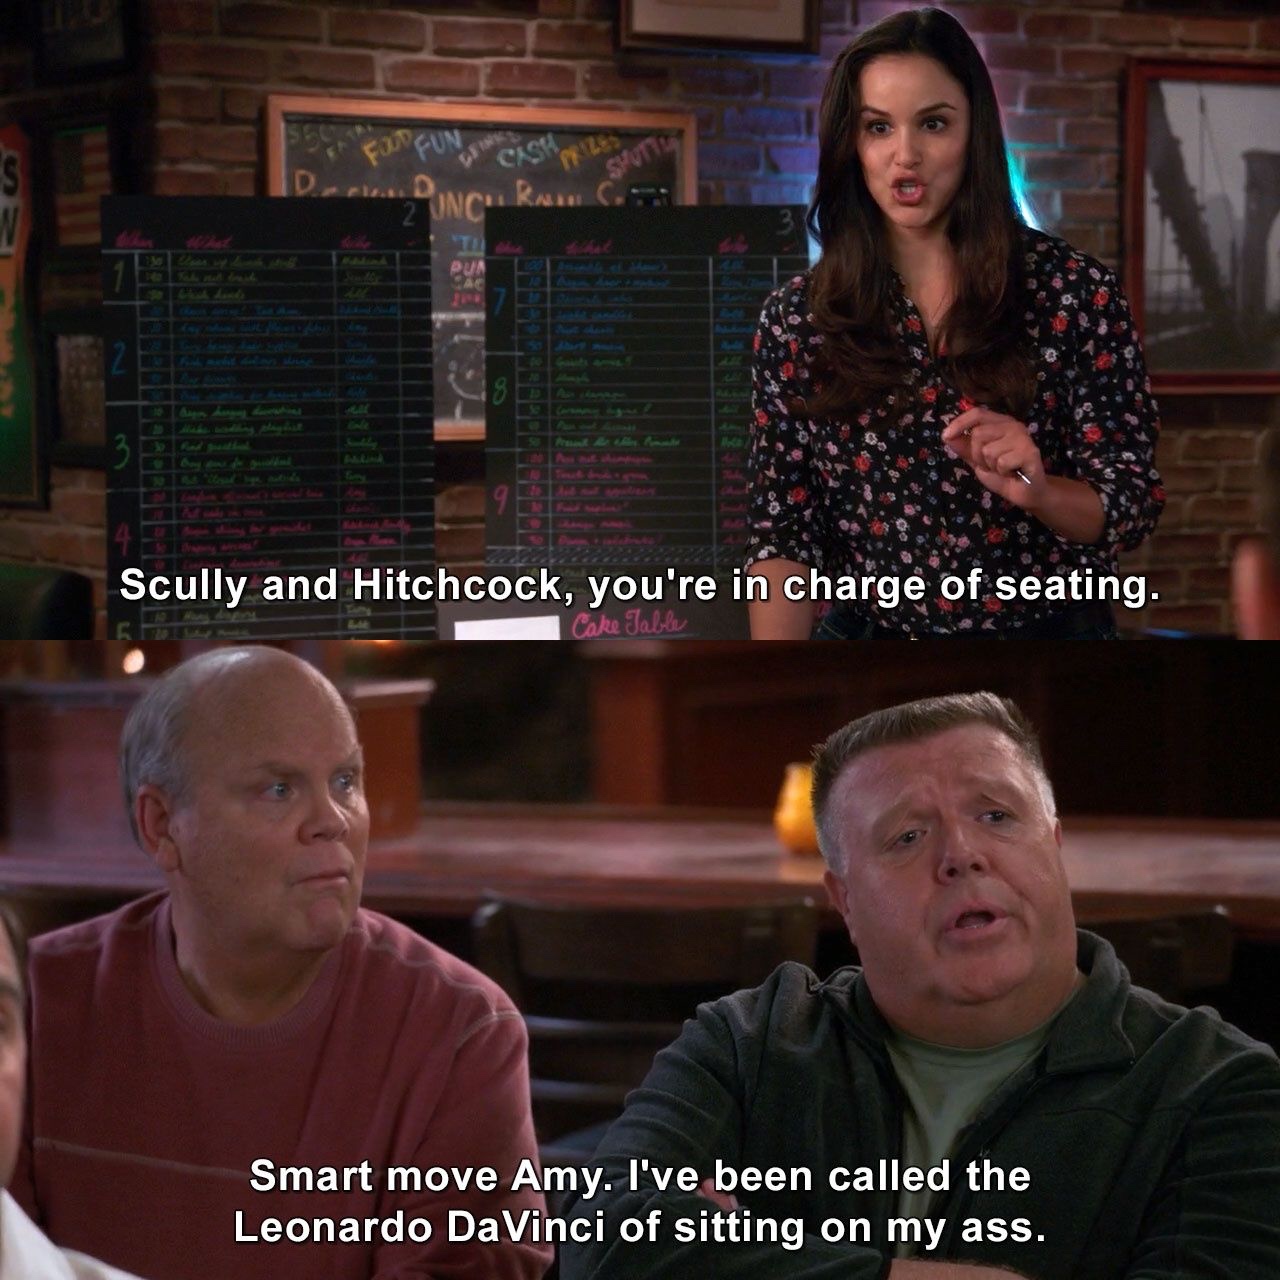 scully b99 quotes - DeQCH Rc. Scully and Hitchcock, you're in charge of seating. Cake Table Smart move Amy. I've been called the Leonardo Da Vinci of sitting on my ass.